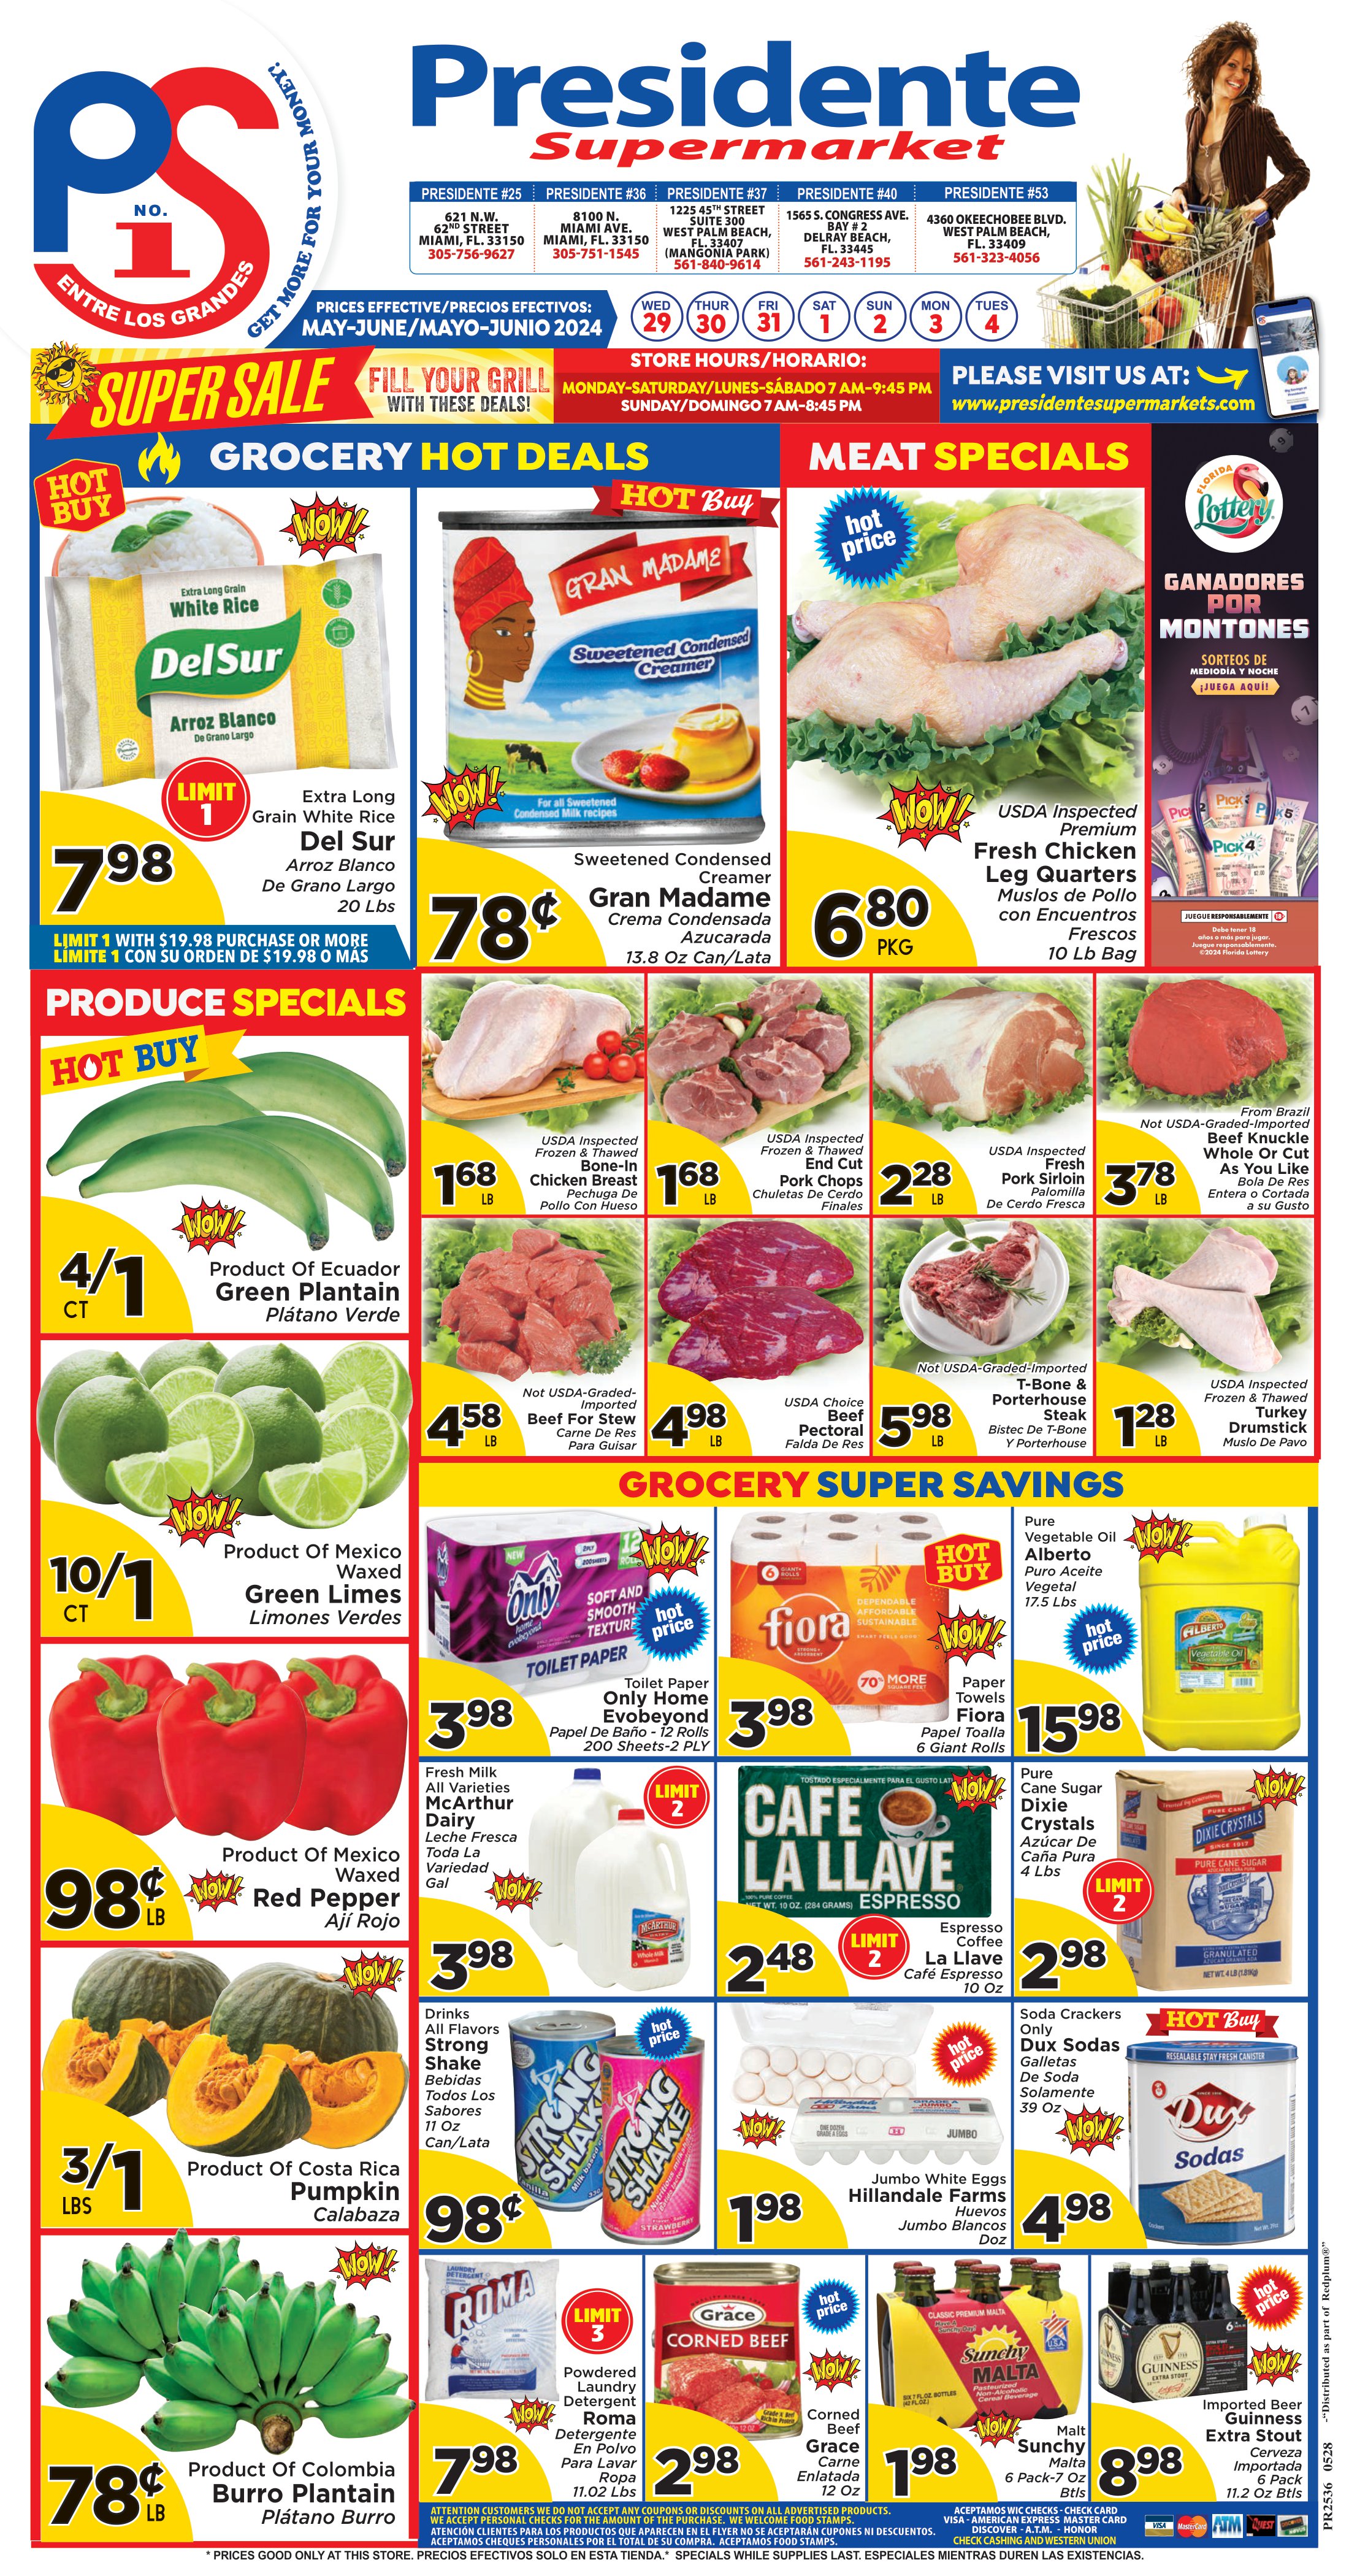 Presidente Supermarket - Weekly Promo for Stores 25, 36, 37, 40 and 43 Page 1